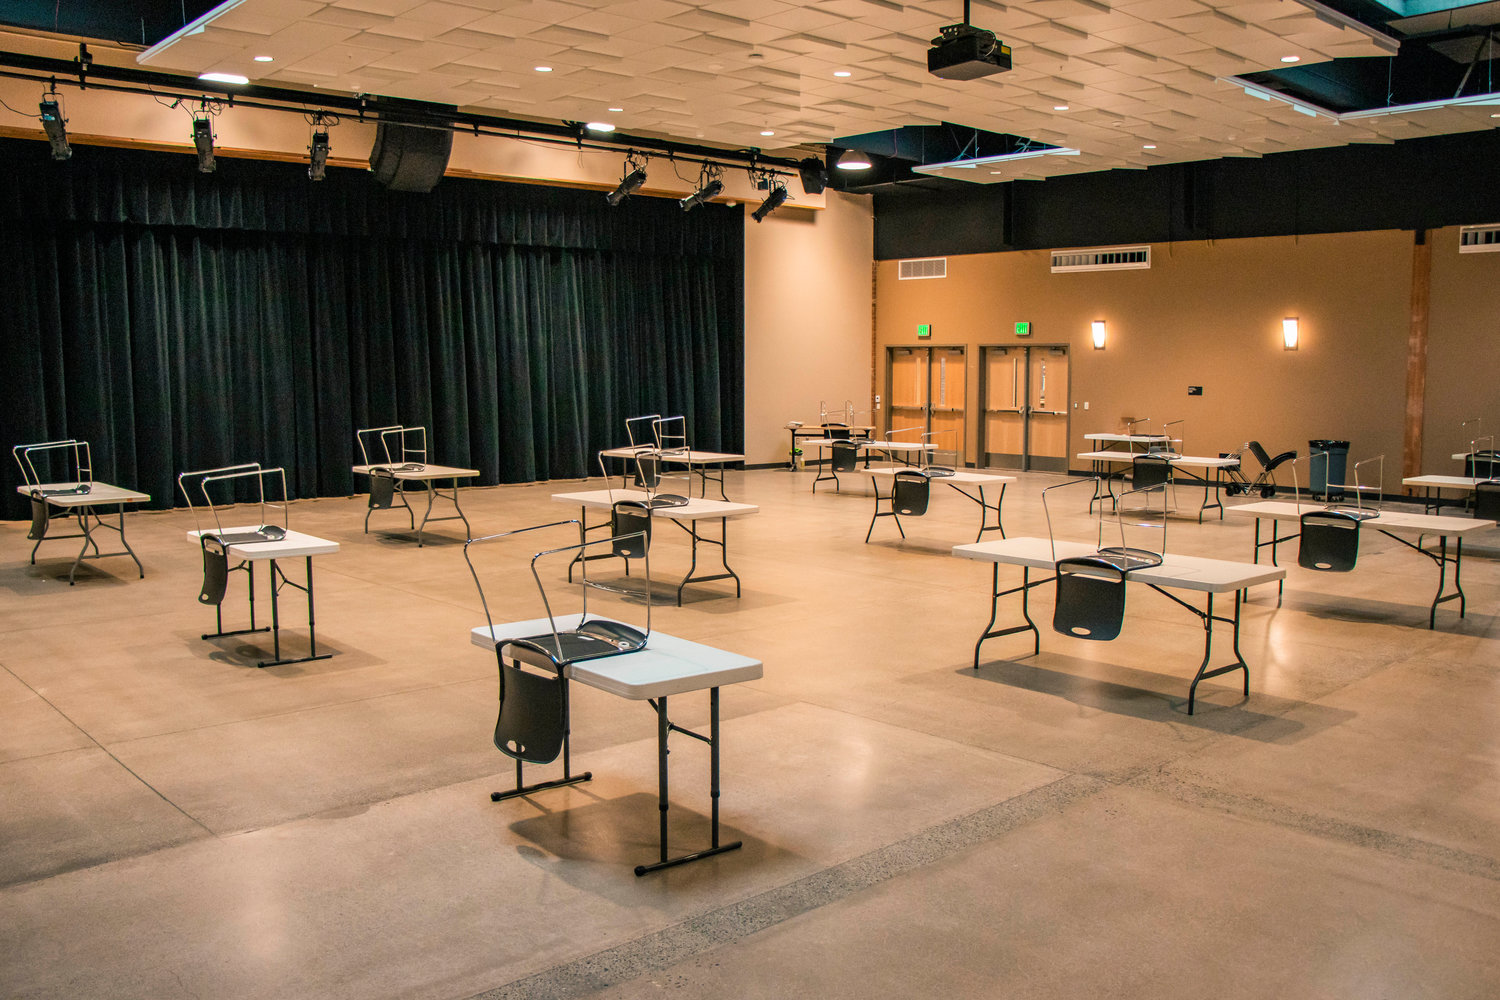 Tables and chairs are separated to help prevent the spread of COVID-19 in a room where students can bring computers and work using Centralia High School’s Wi-Fi.